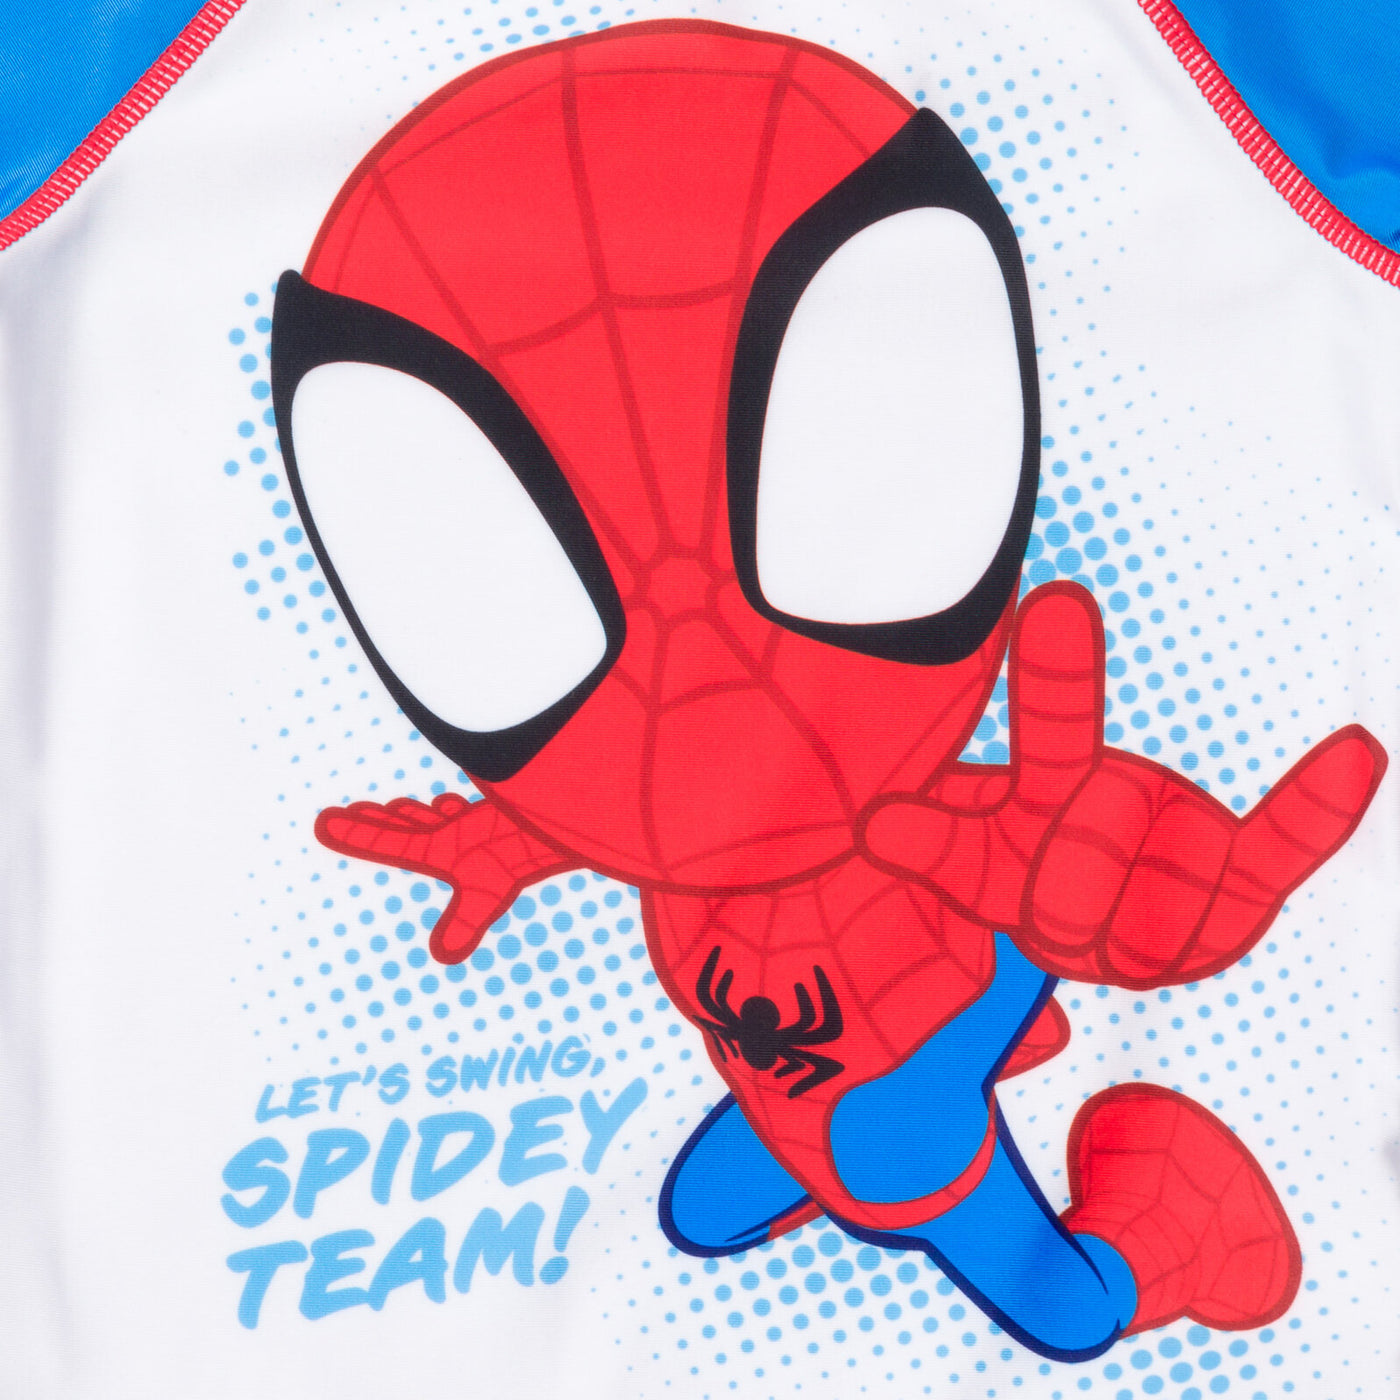 Marvel Spidey and His Amazing Friends UPF 50+ Rash Guard Swim Trunks Outfit Set